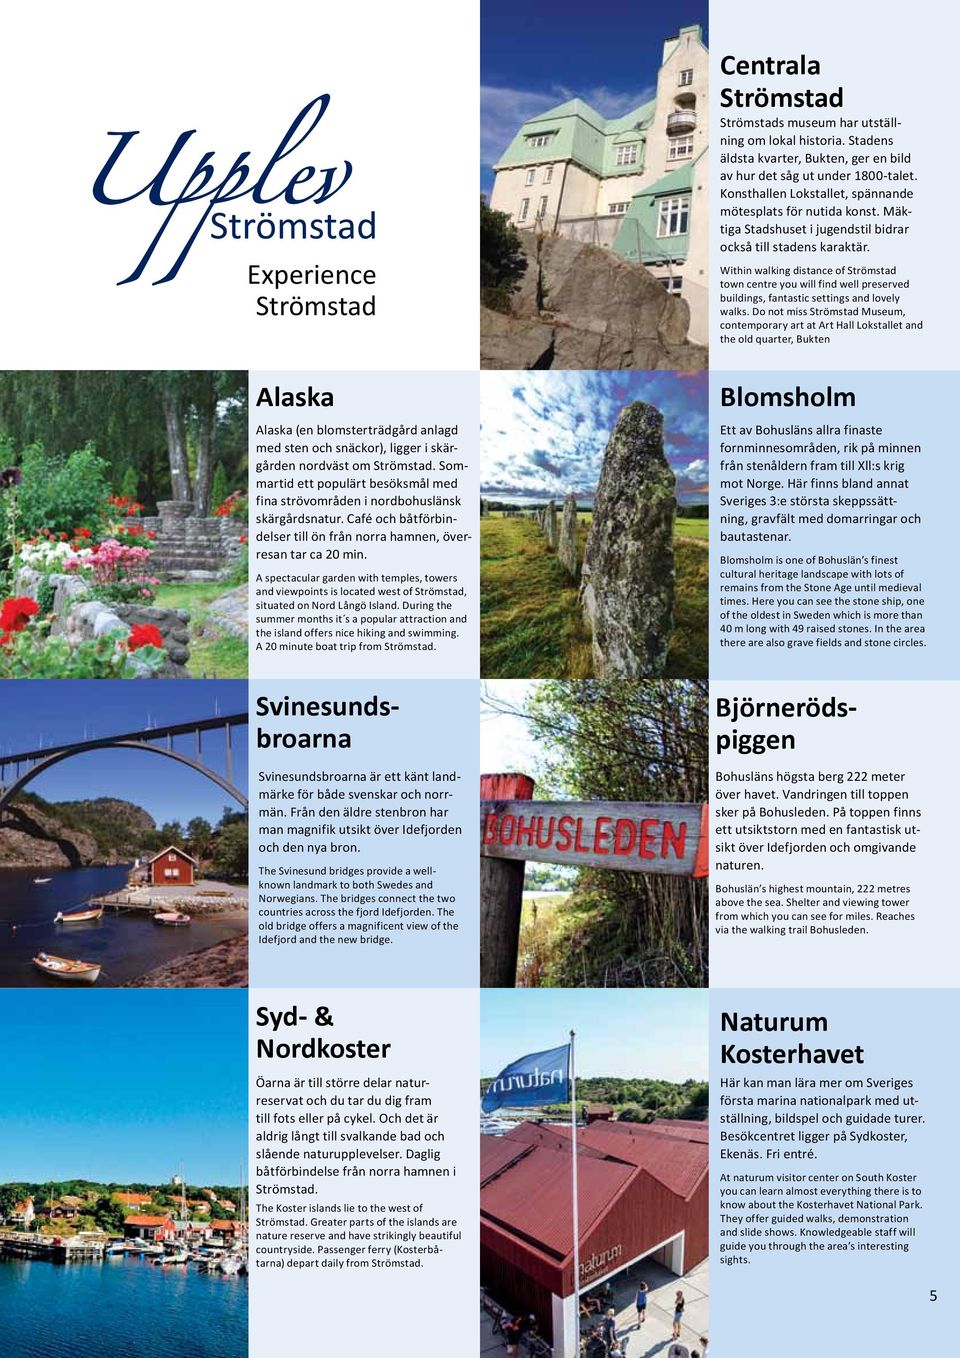 Within walking distance of Strömstad town centre you will find well preserved buildings, fantastic settings and lovely walks.